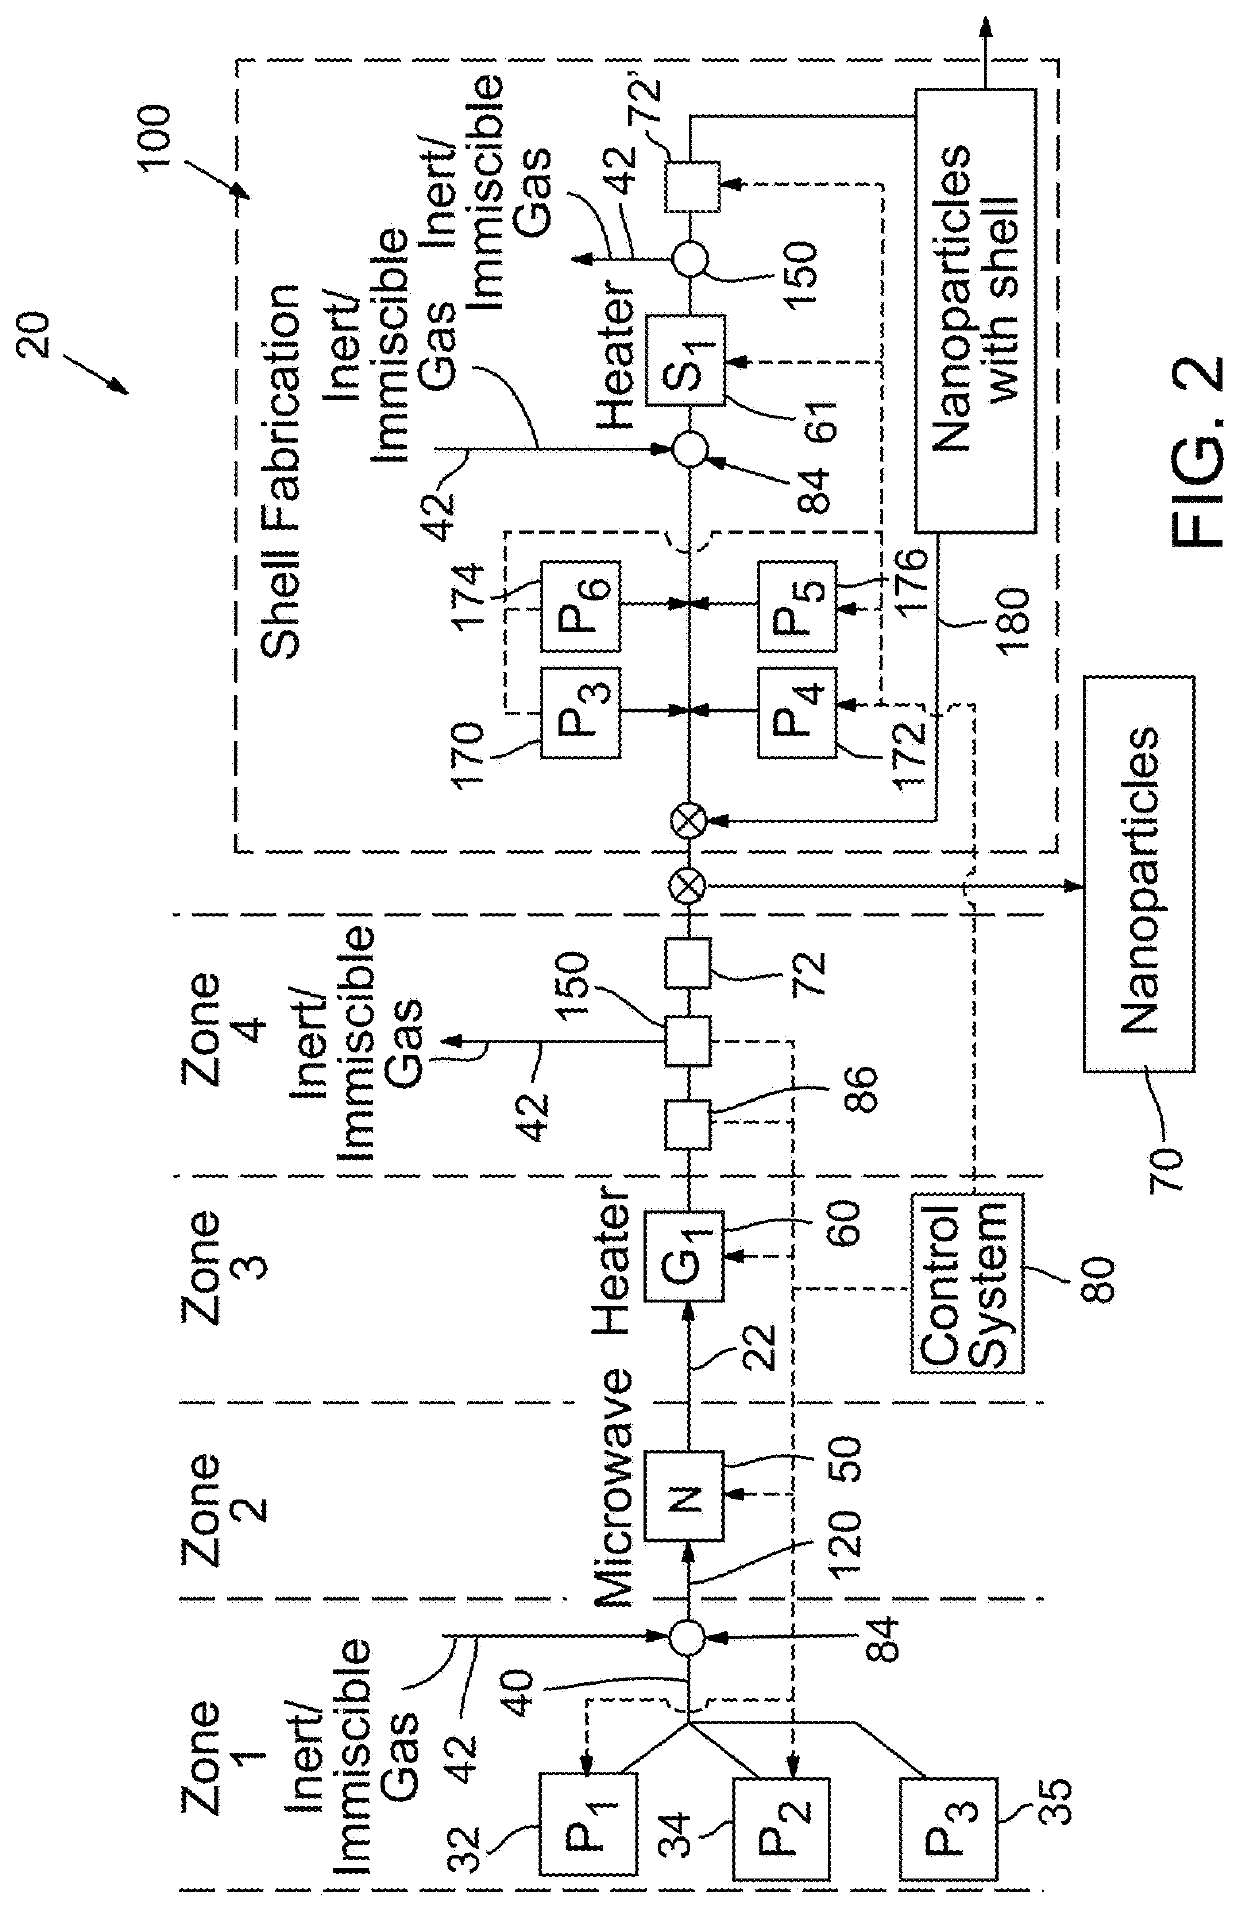 Continuous flow reactor for the synthesis of nanoparticles